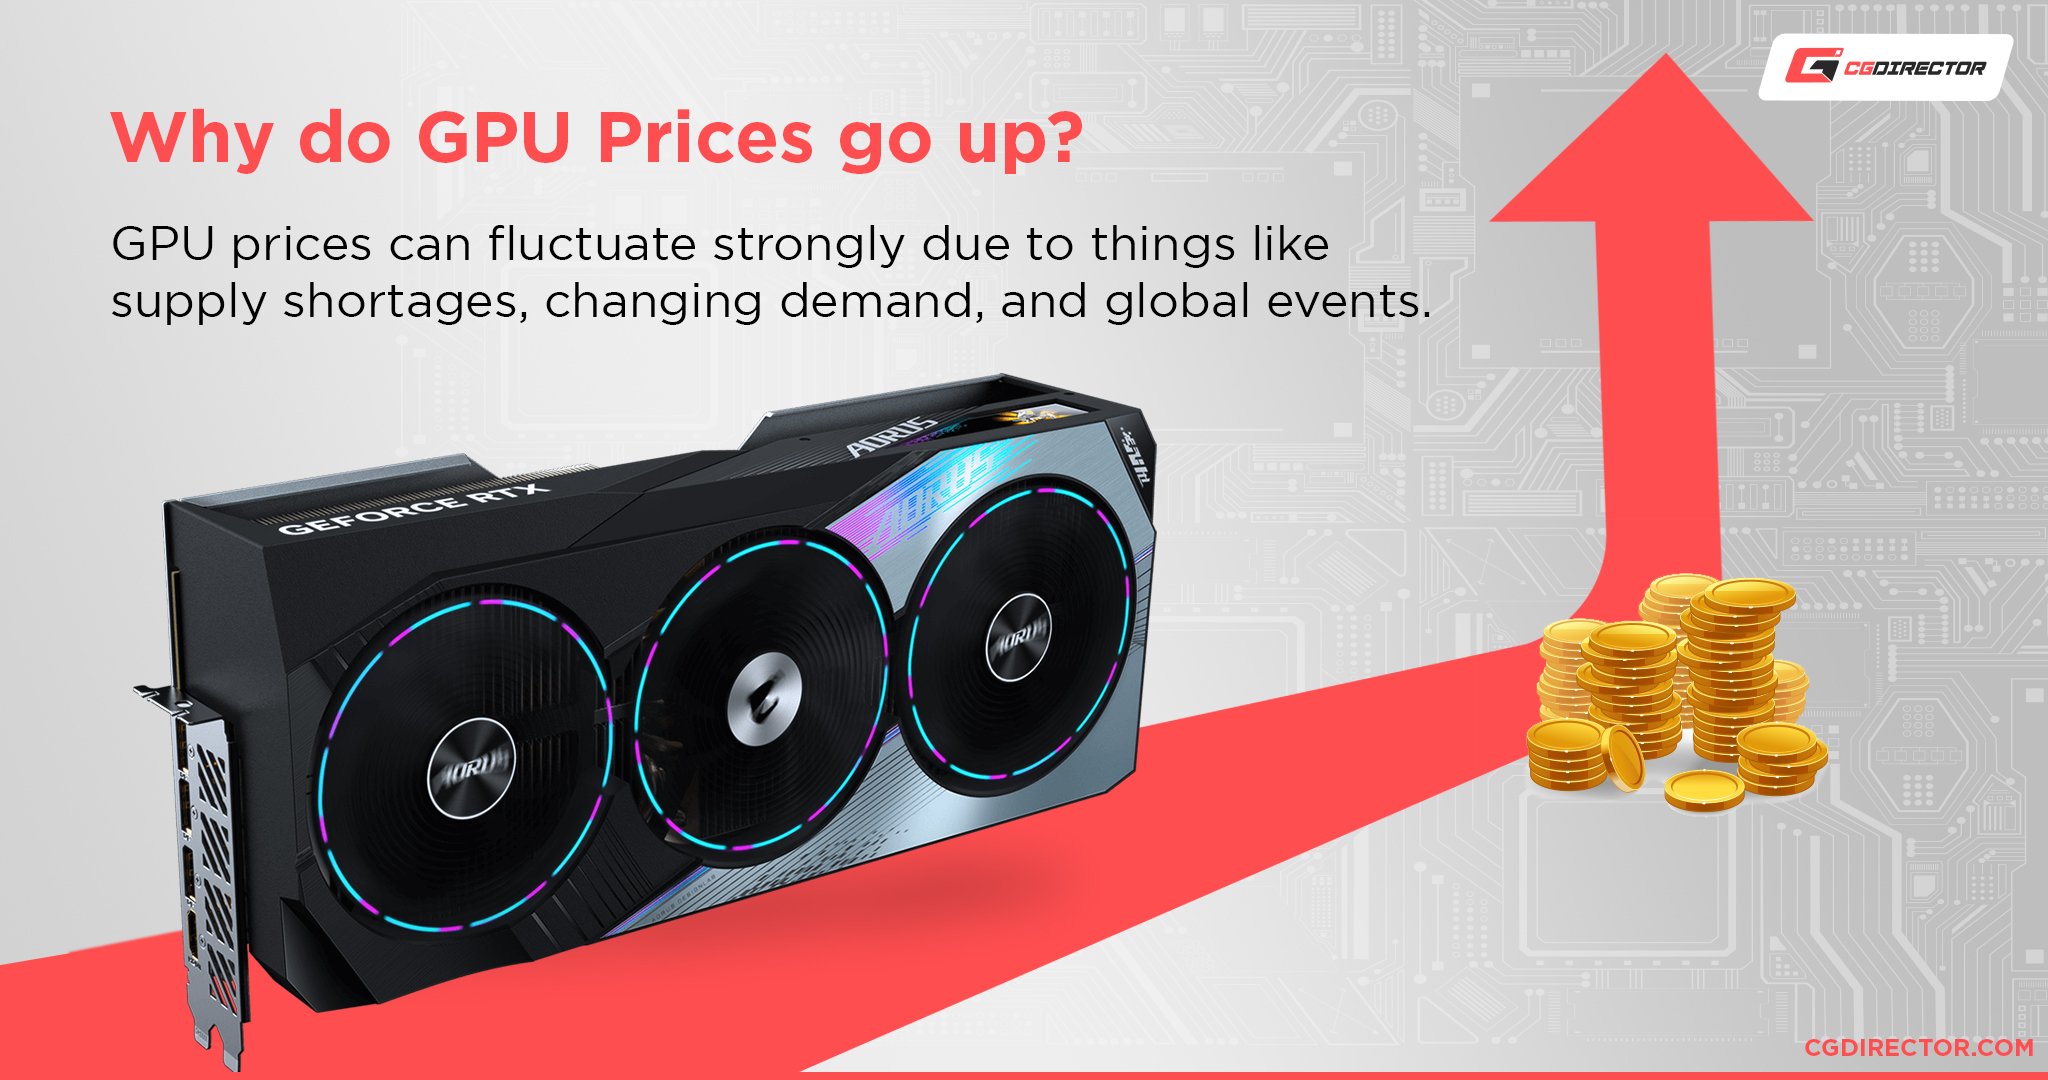 Why GPU prices fluctuate and go up